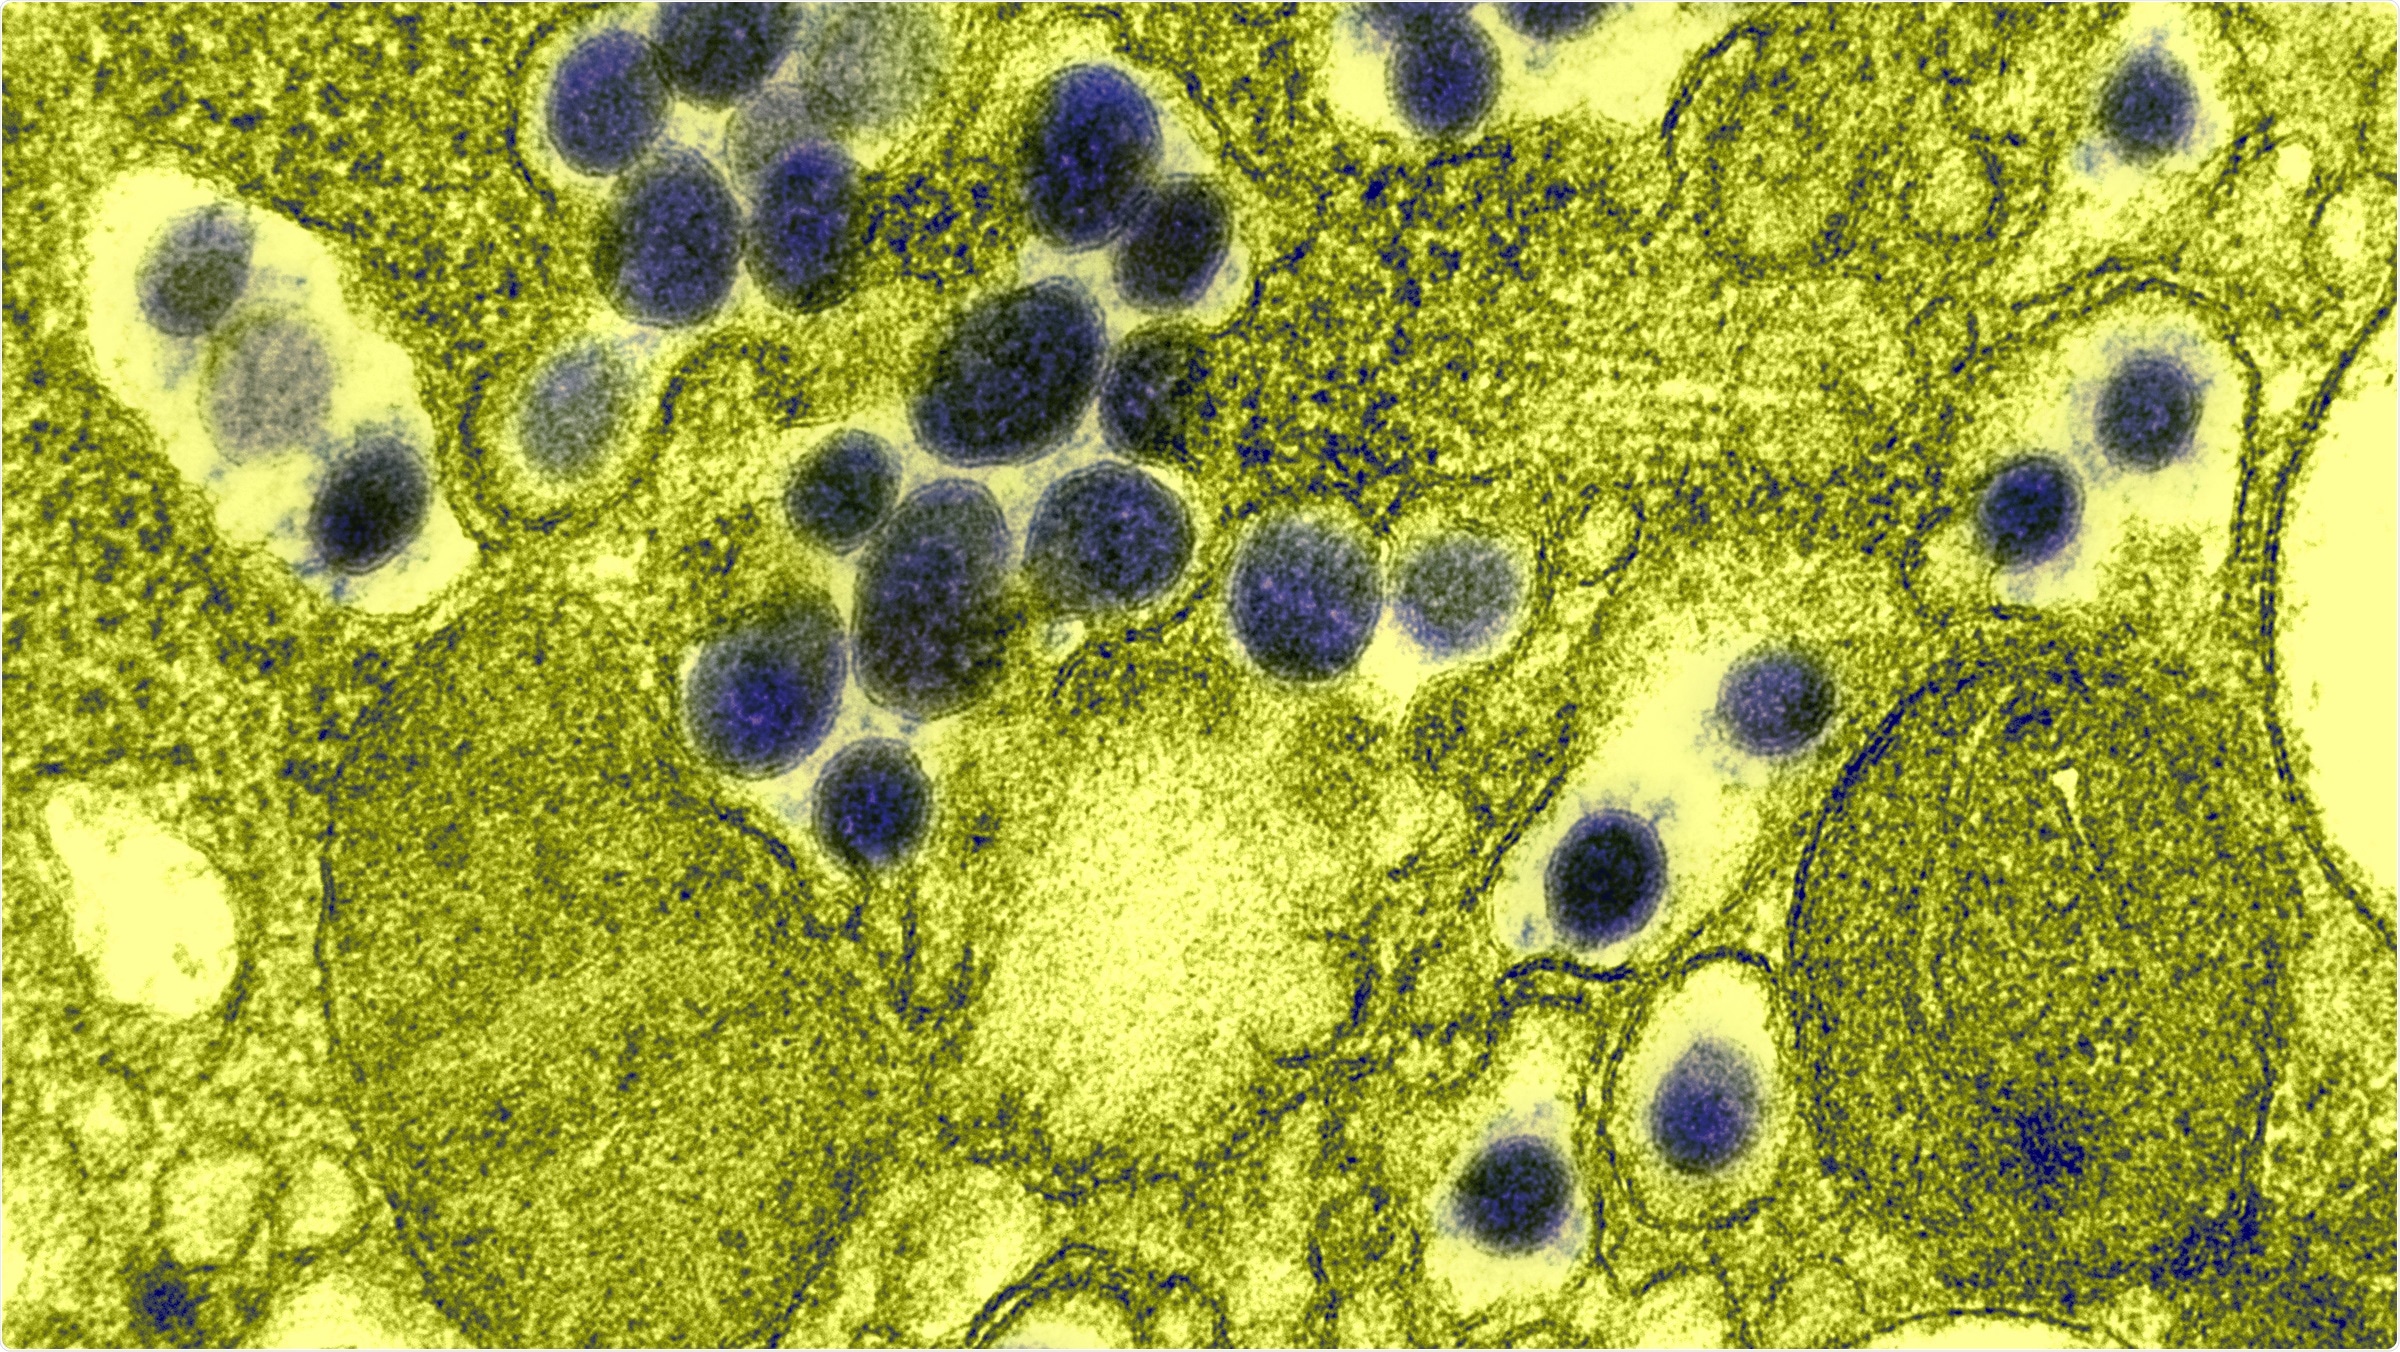 Study: Identification of natural SARS-CoV-2 infection in seroprevalence studies among vaccinated populations. Image Credit: NIAID